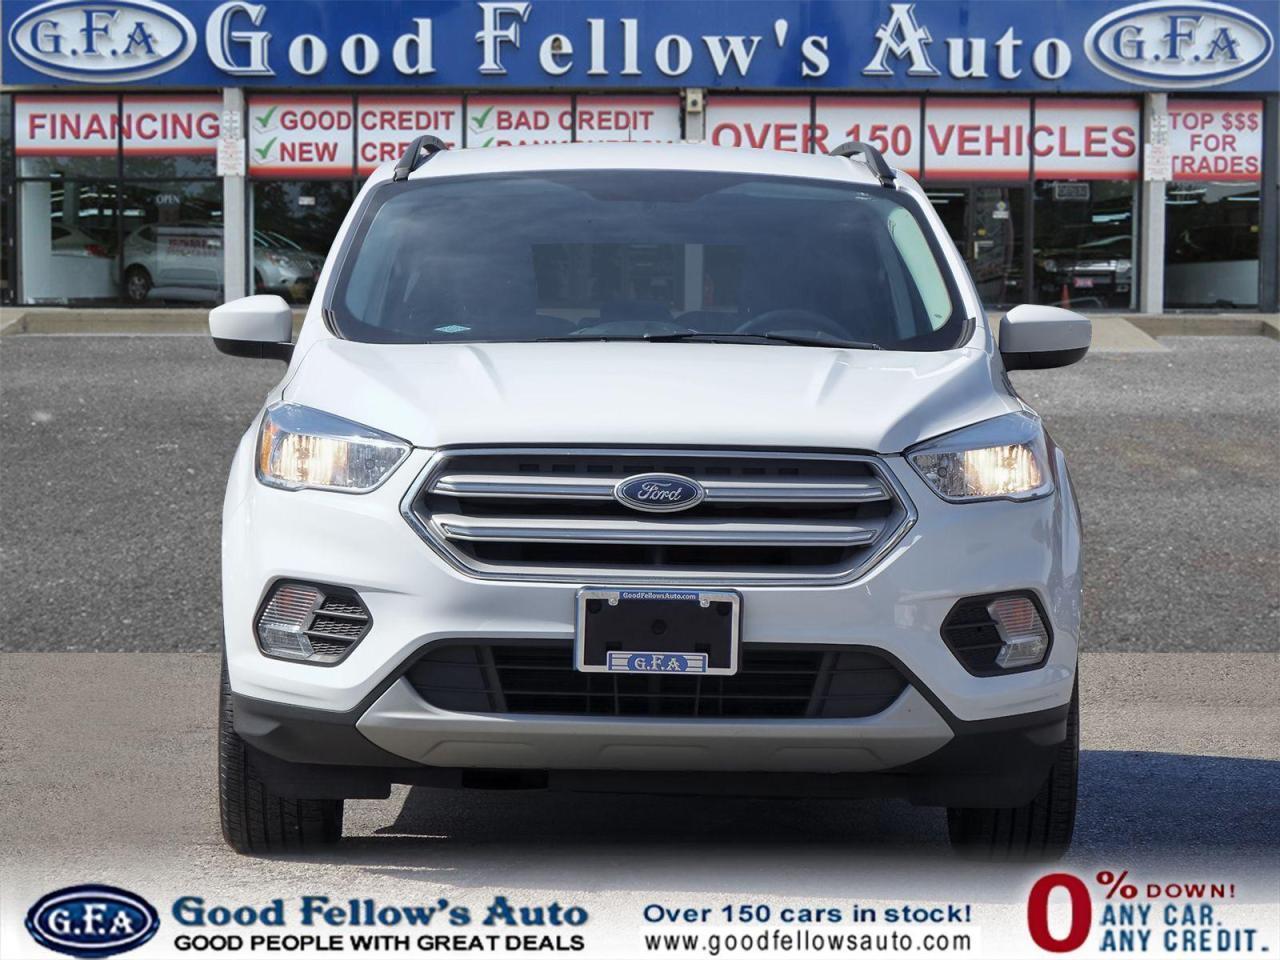 2018 Ford Escape SE MODEL, POWER SEATS, HEATED SEATS, REARVIEW CAME - Photo #3